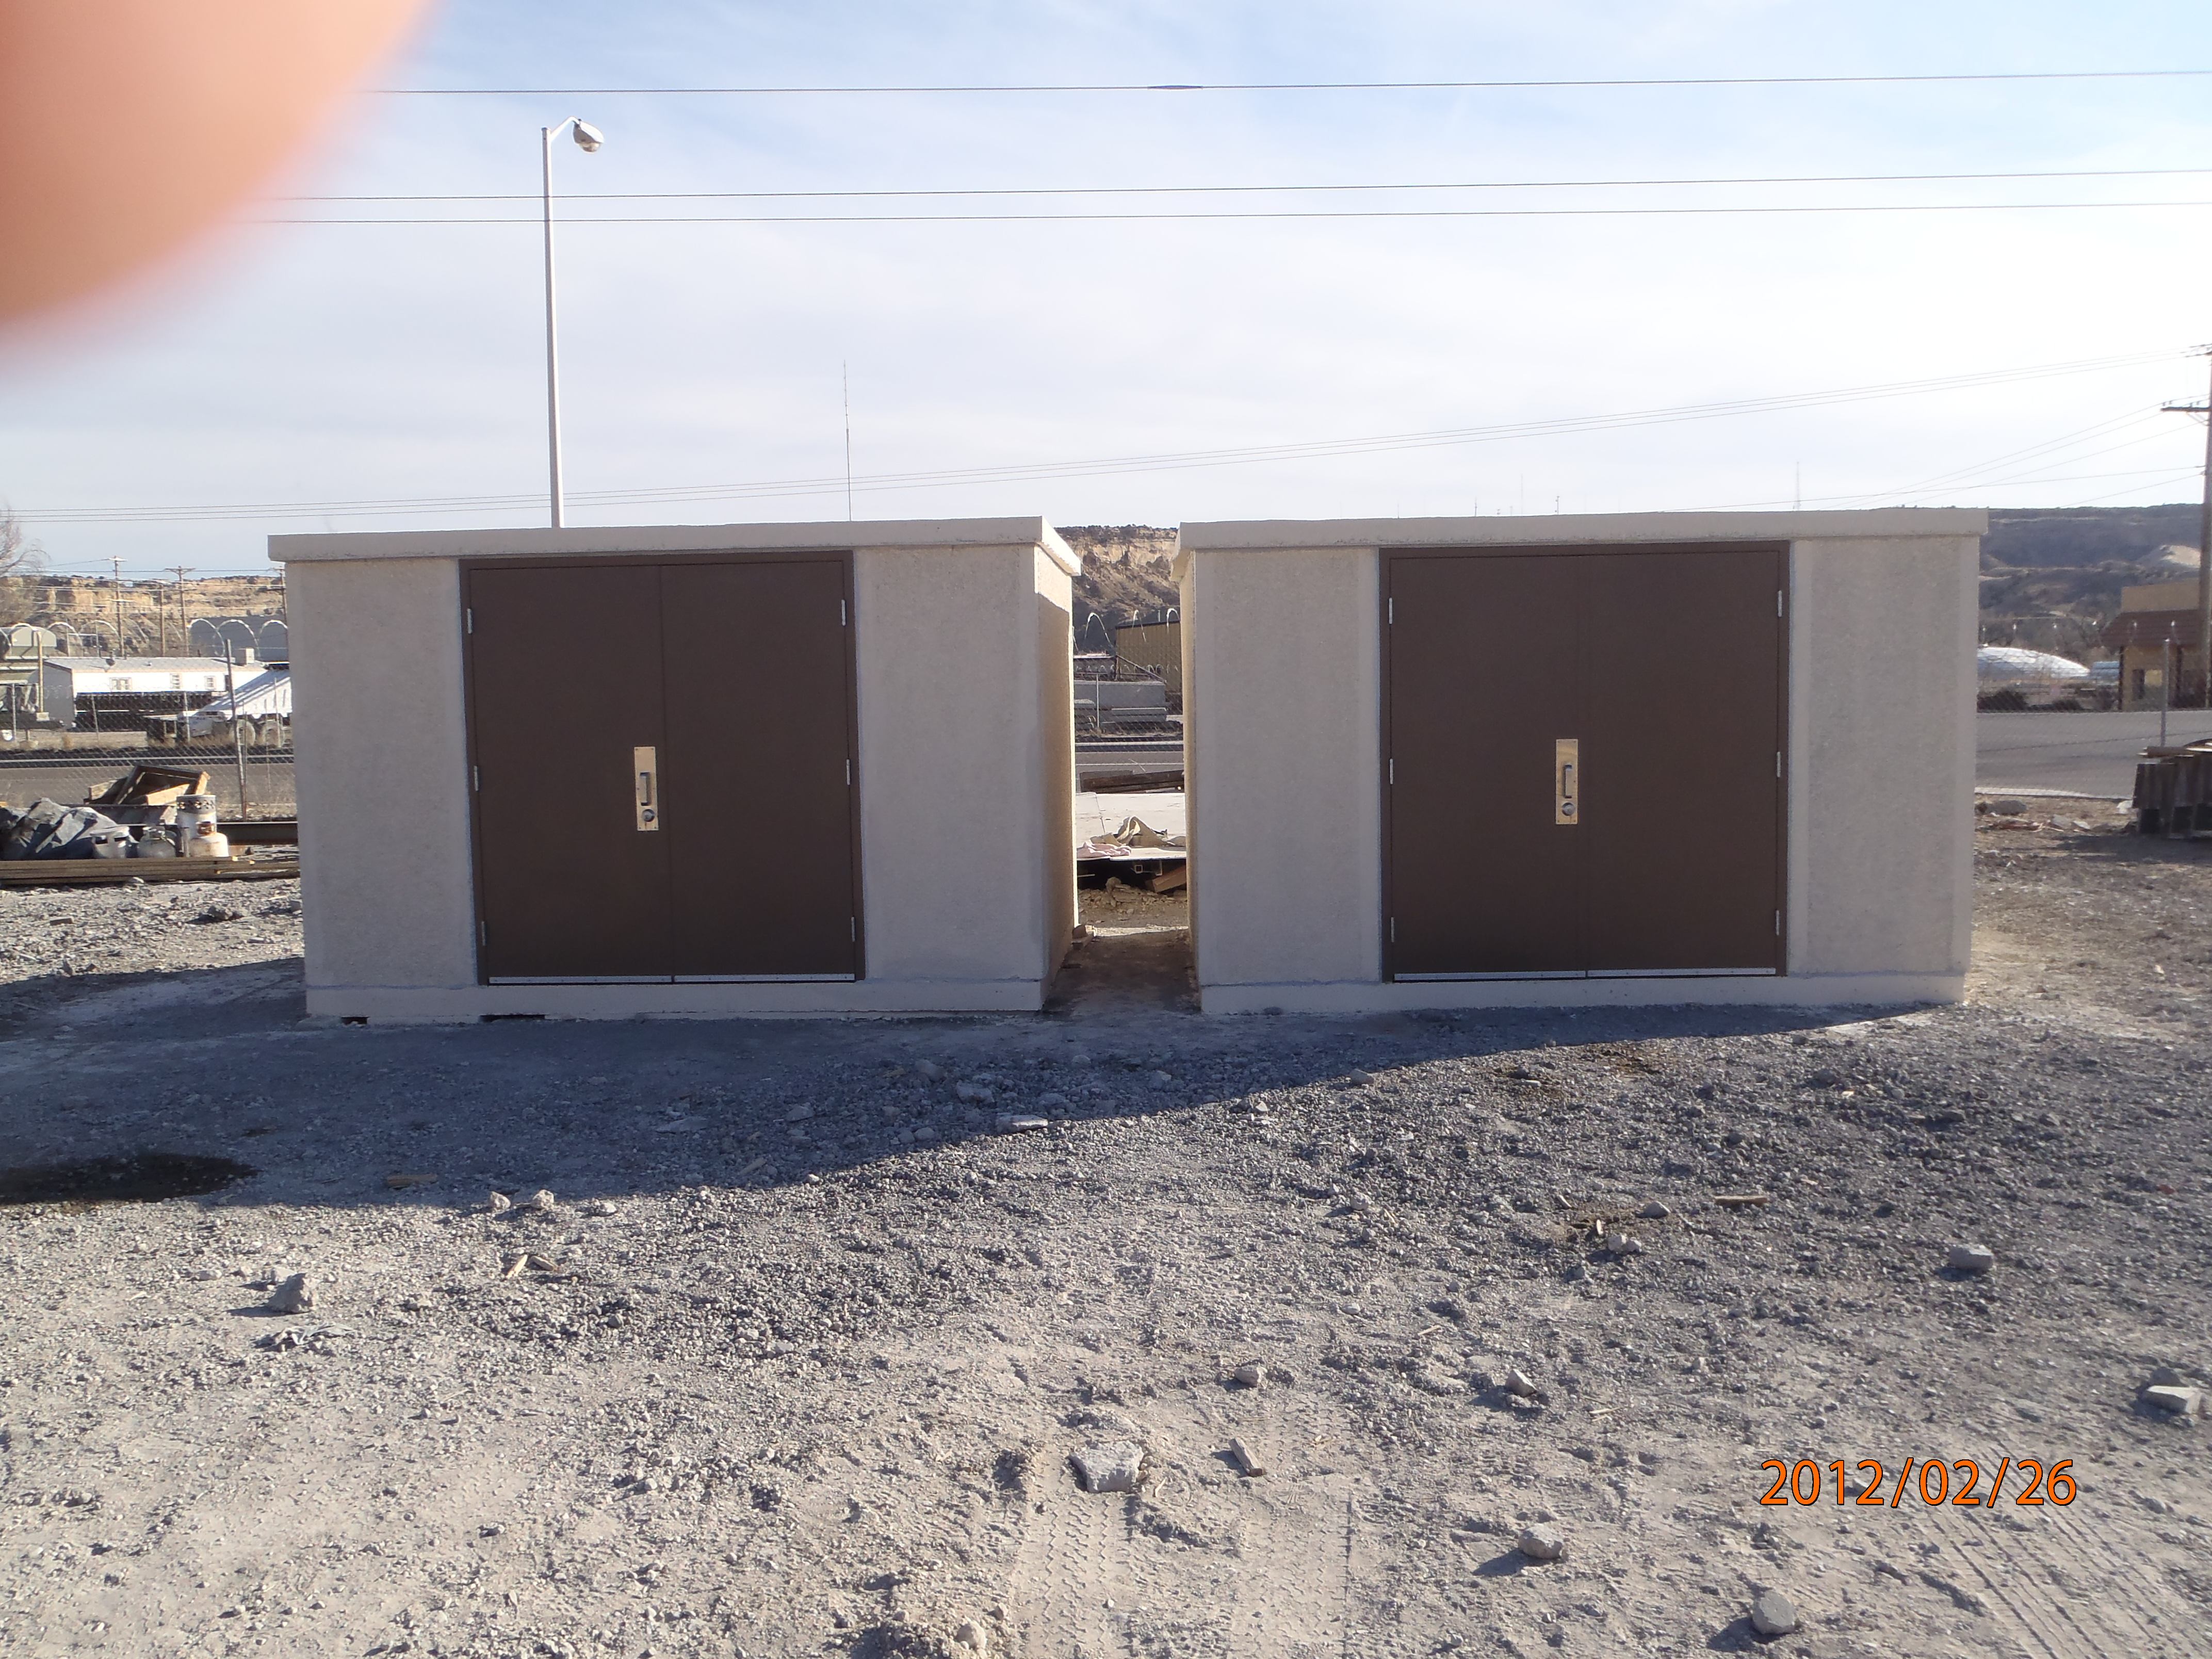 Concrete Storm Shelters Offer Satety & Security For Military & For You